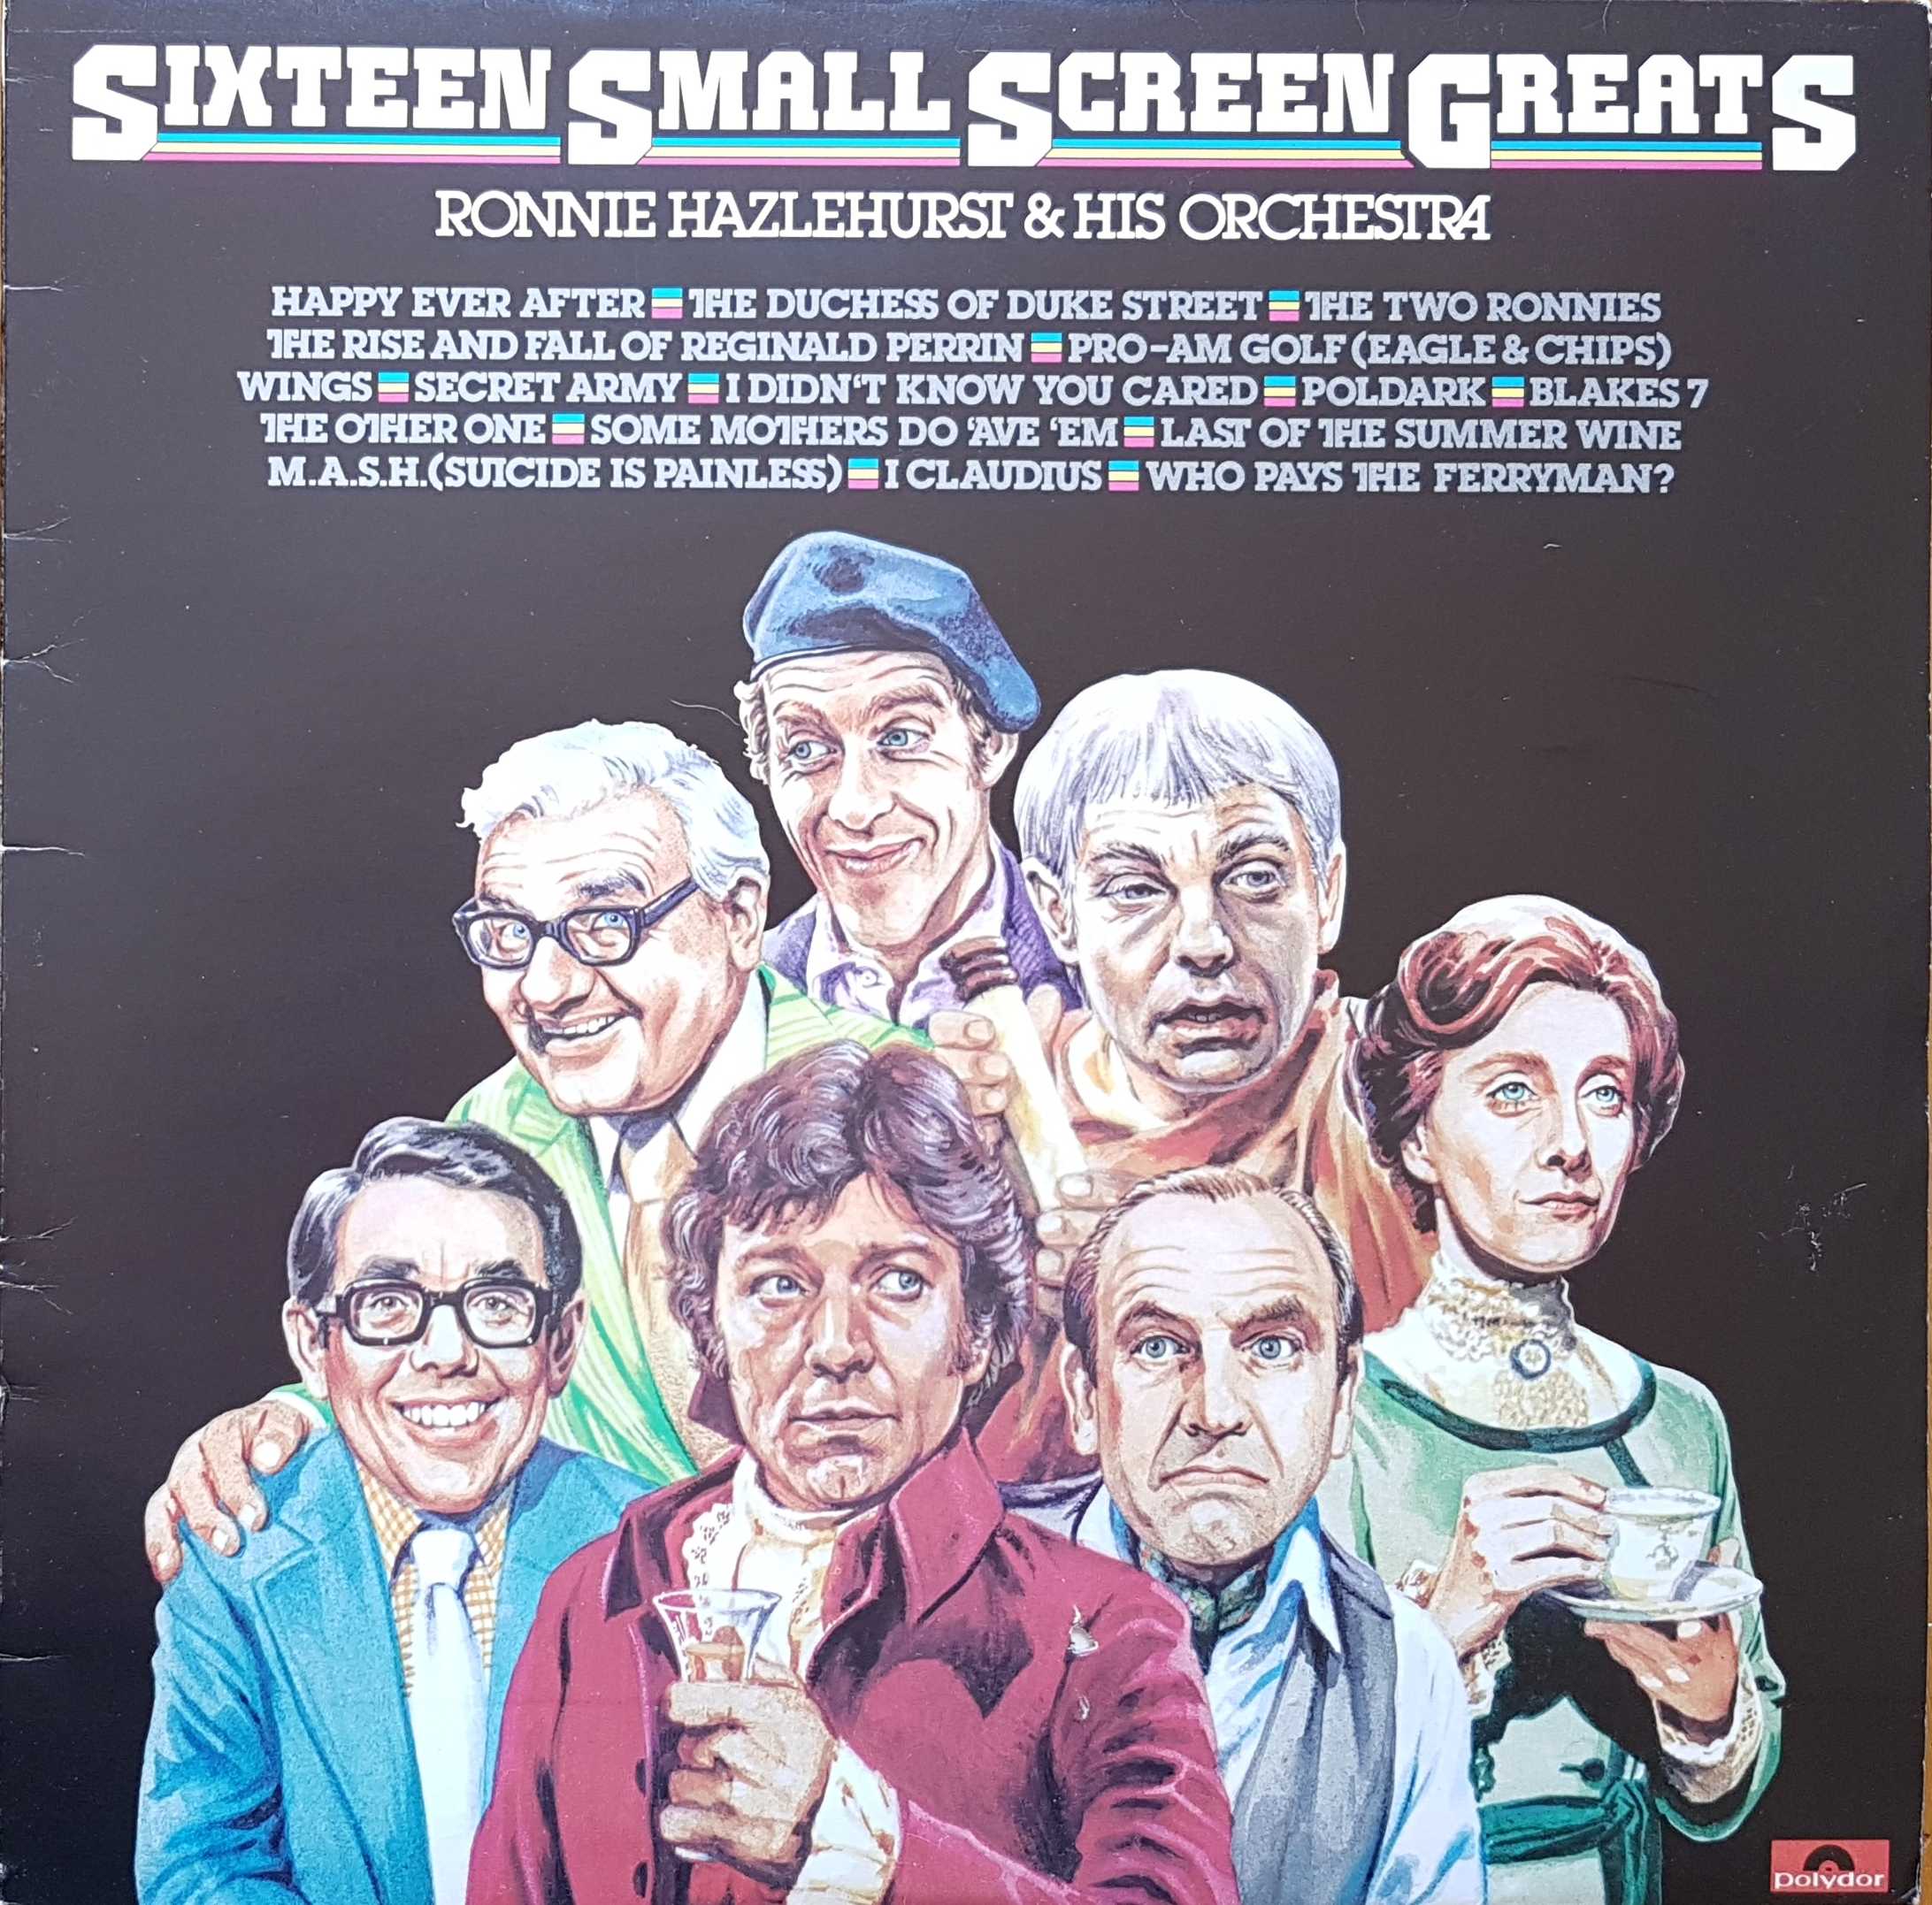 Picture of Sixteen small screen gems by artist Ronnie Hazlehurst & his orchestra from ITV, Channel 4 and Channel 5 albums library